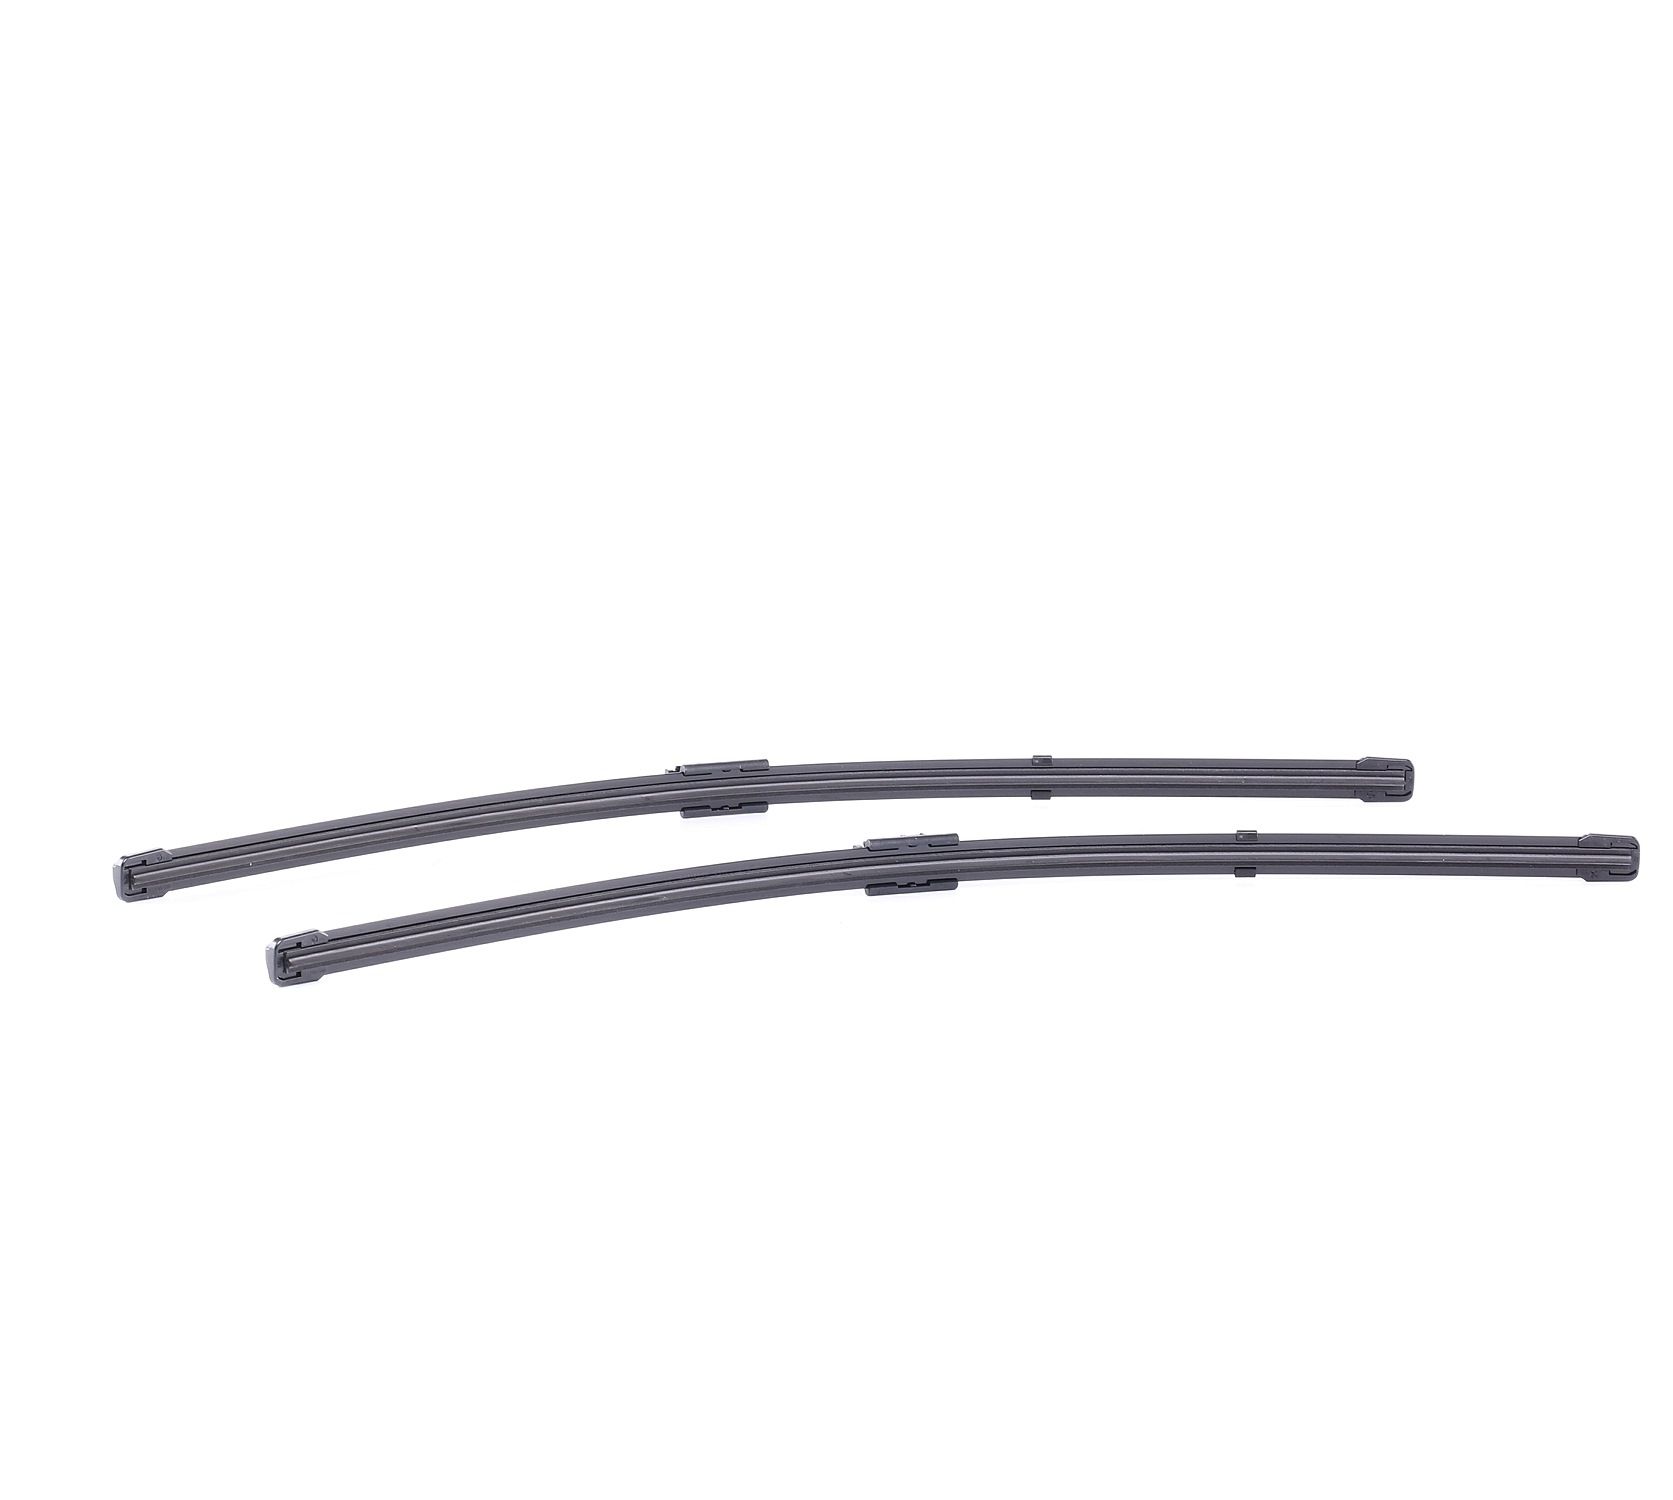 AKG WINDSCREEN WIPER BLADE LHD ONLY PASSENGER SIDE SWF 116191 P NEW OE REPLACEMENT 4004260007379 